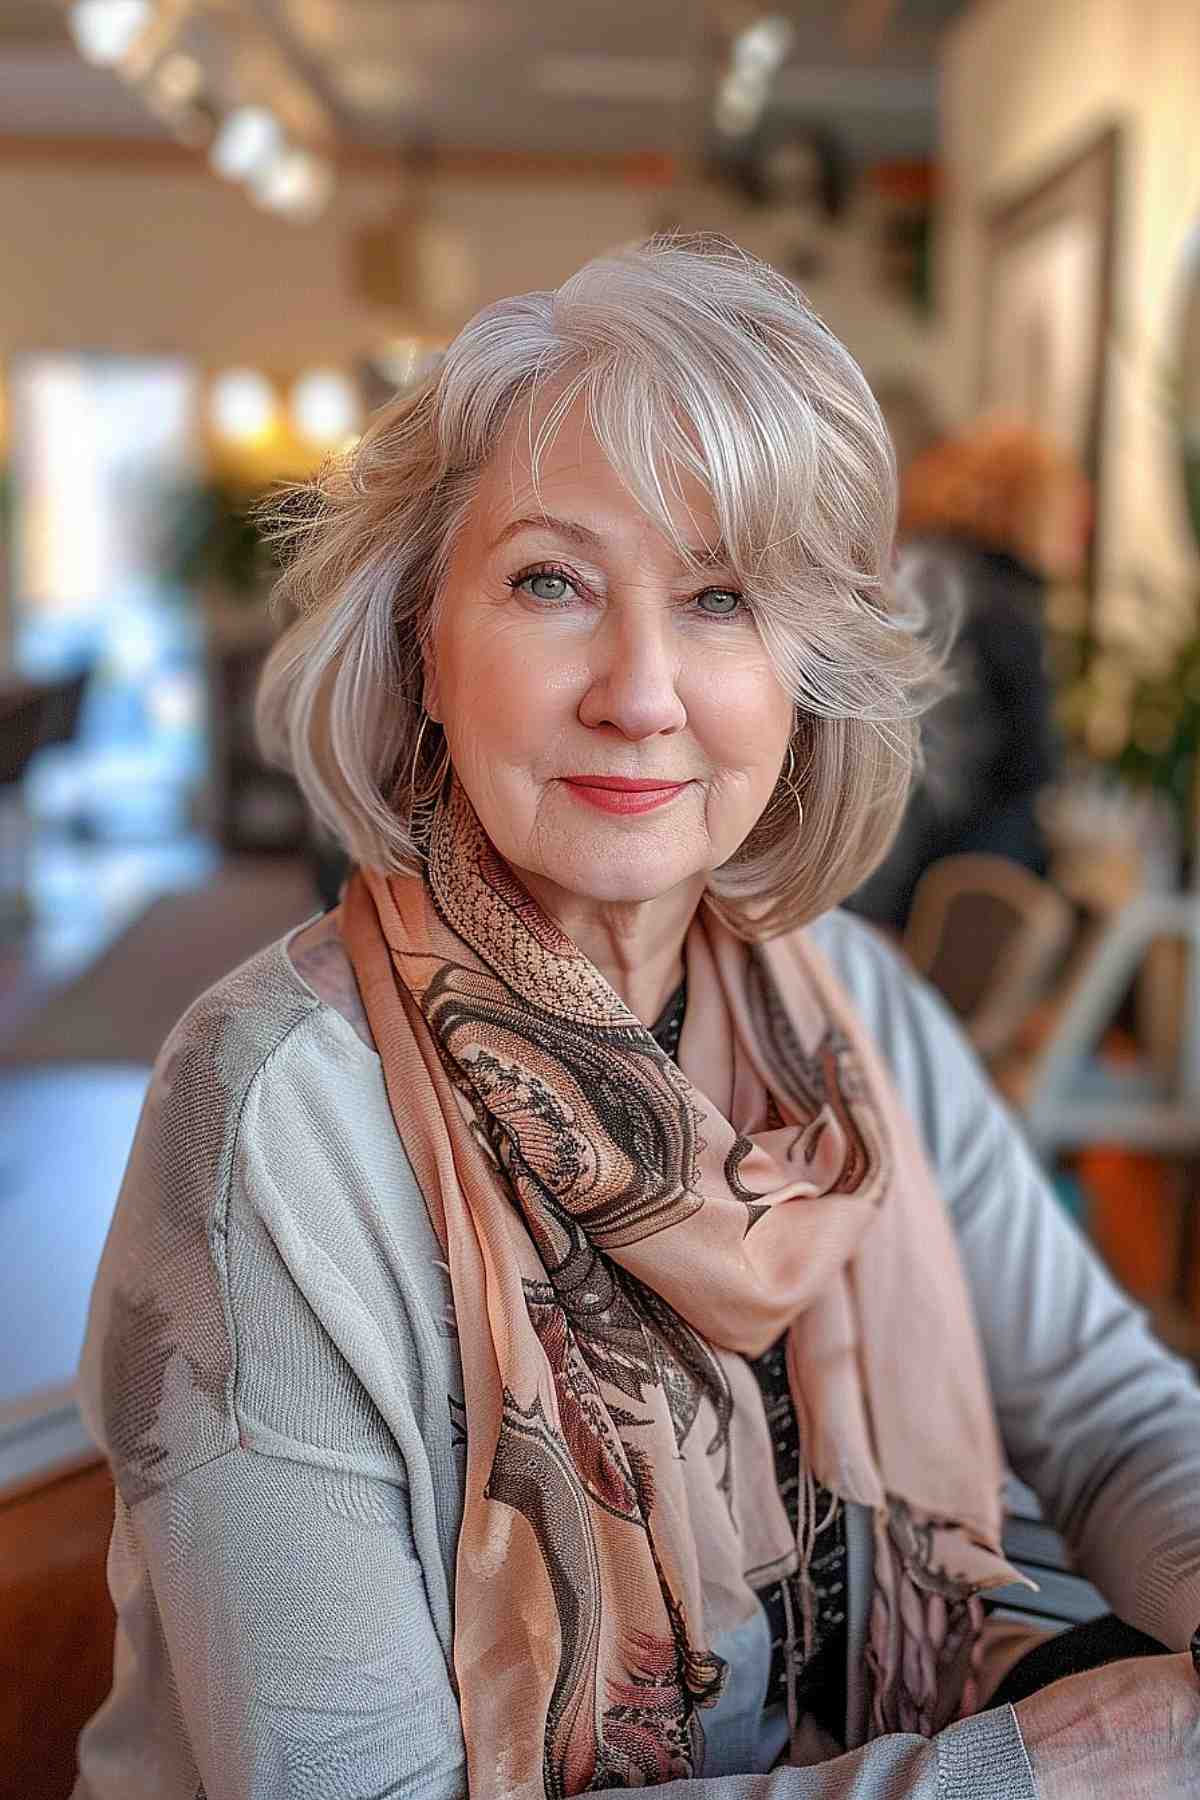 Senior Woman with Fine Hair and Silver Layered Hairstyle